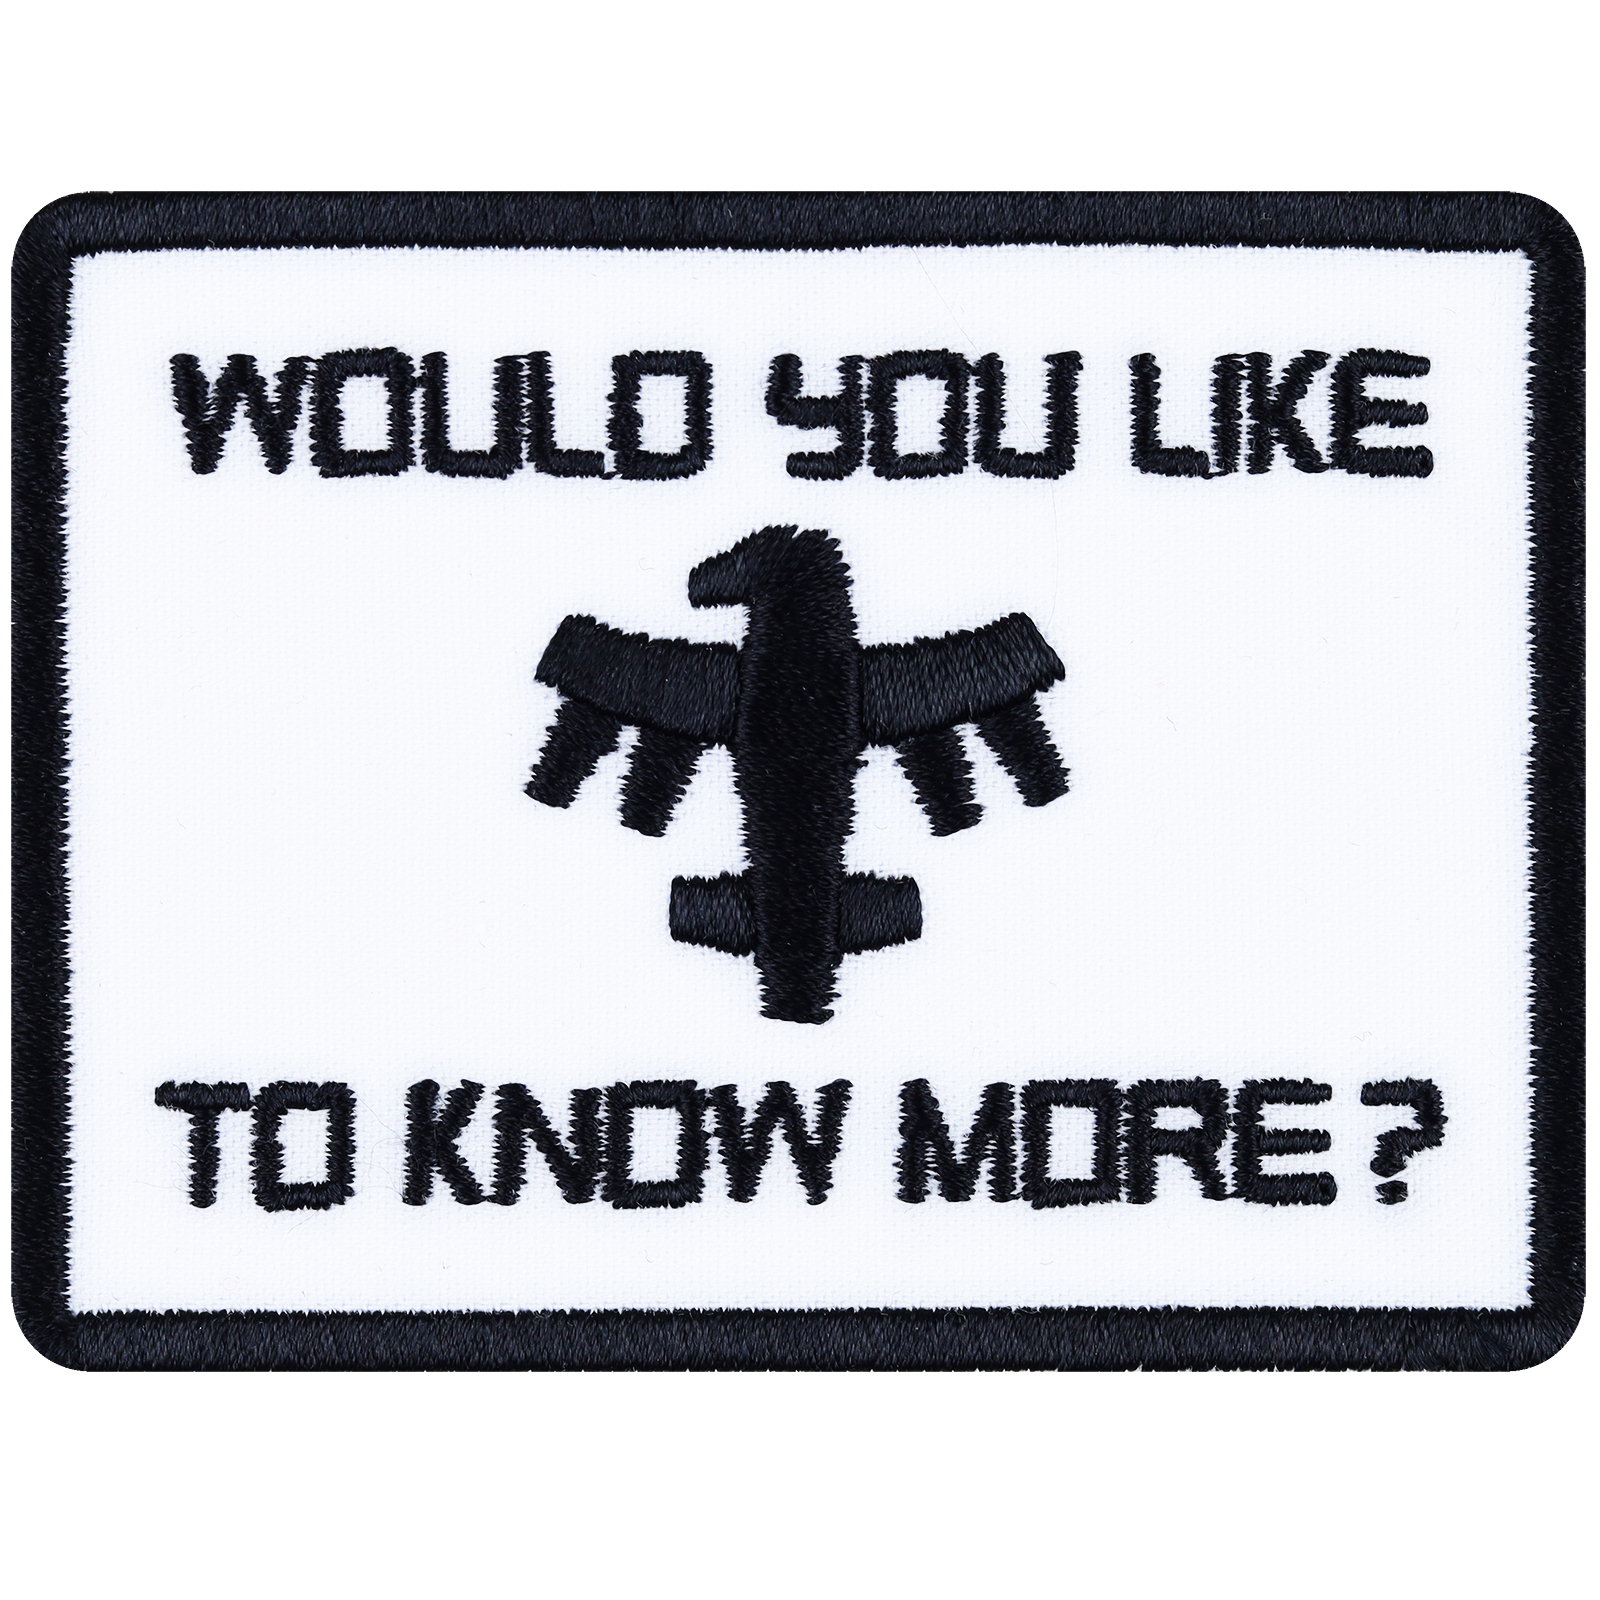 Would you like to know more - Patch